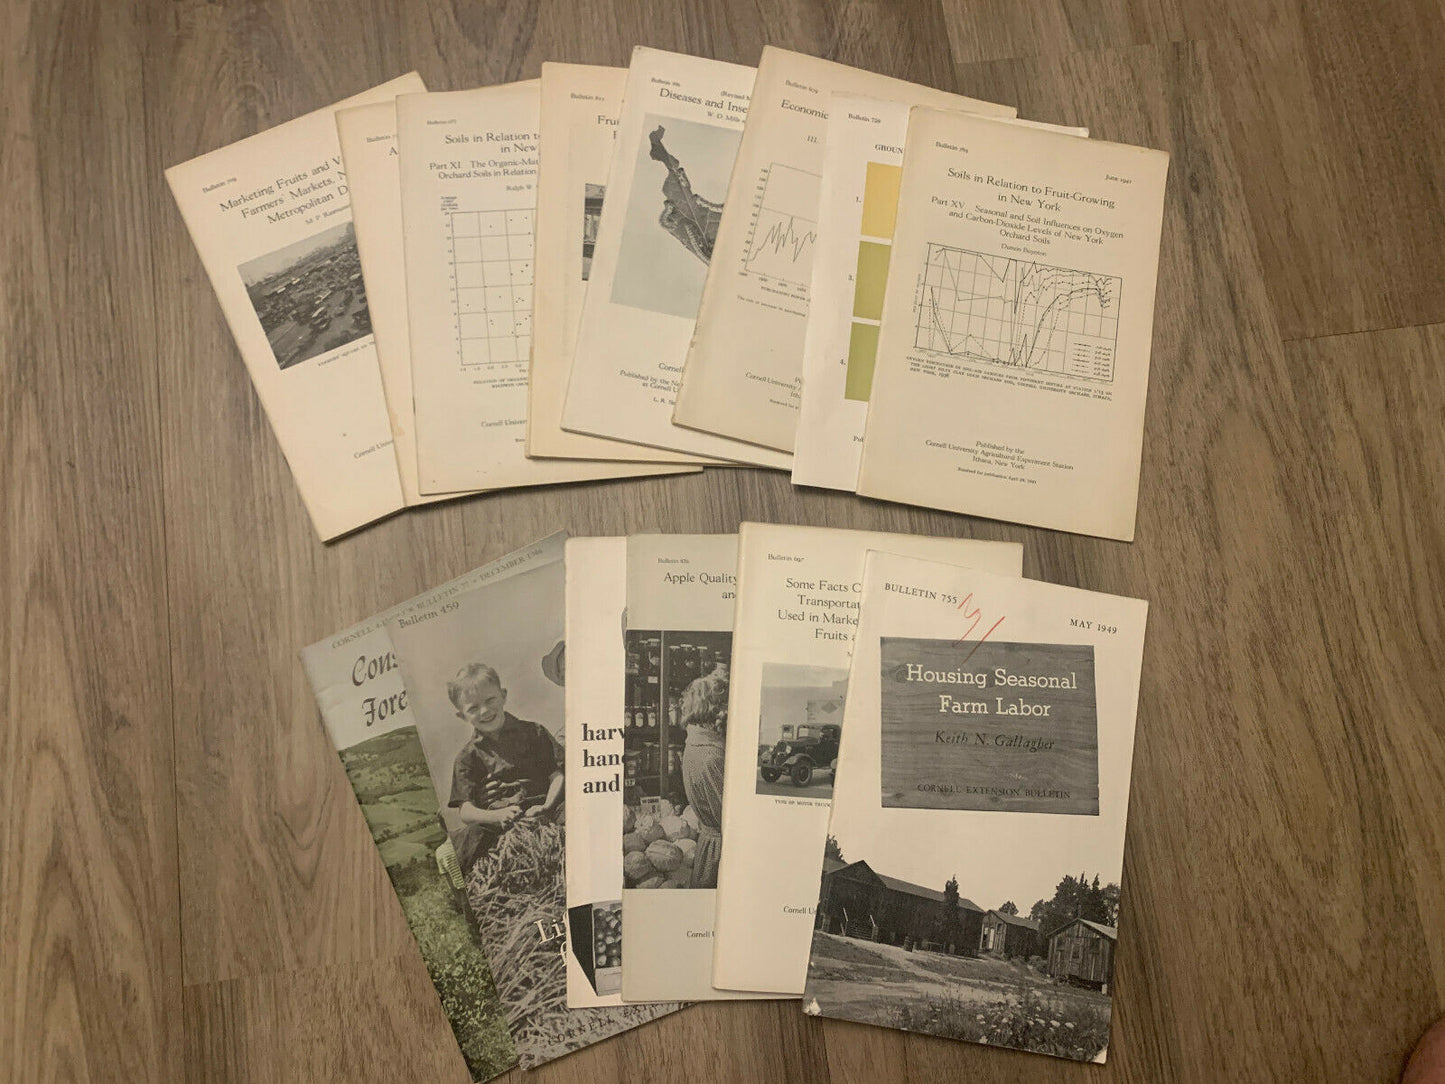 Cornell University Agriculture Bulletin Magazines, Lot of 15 from 1930s-1940s